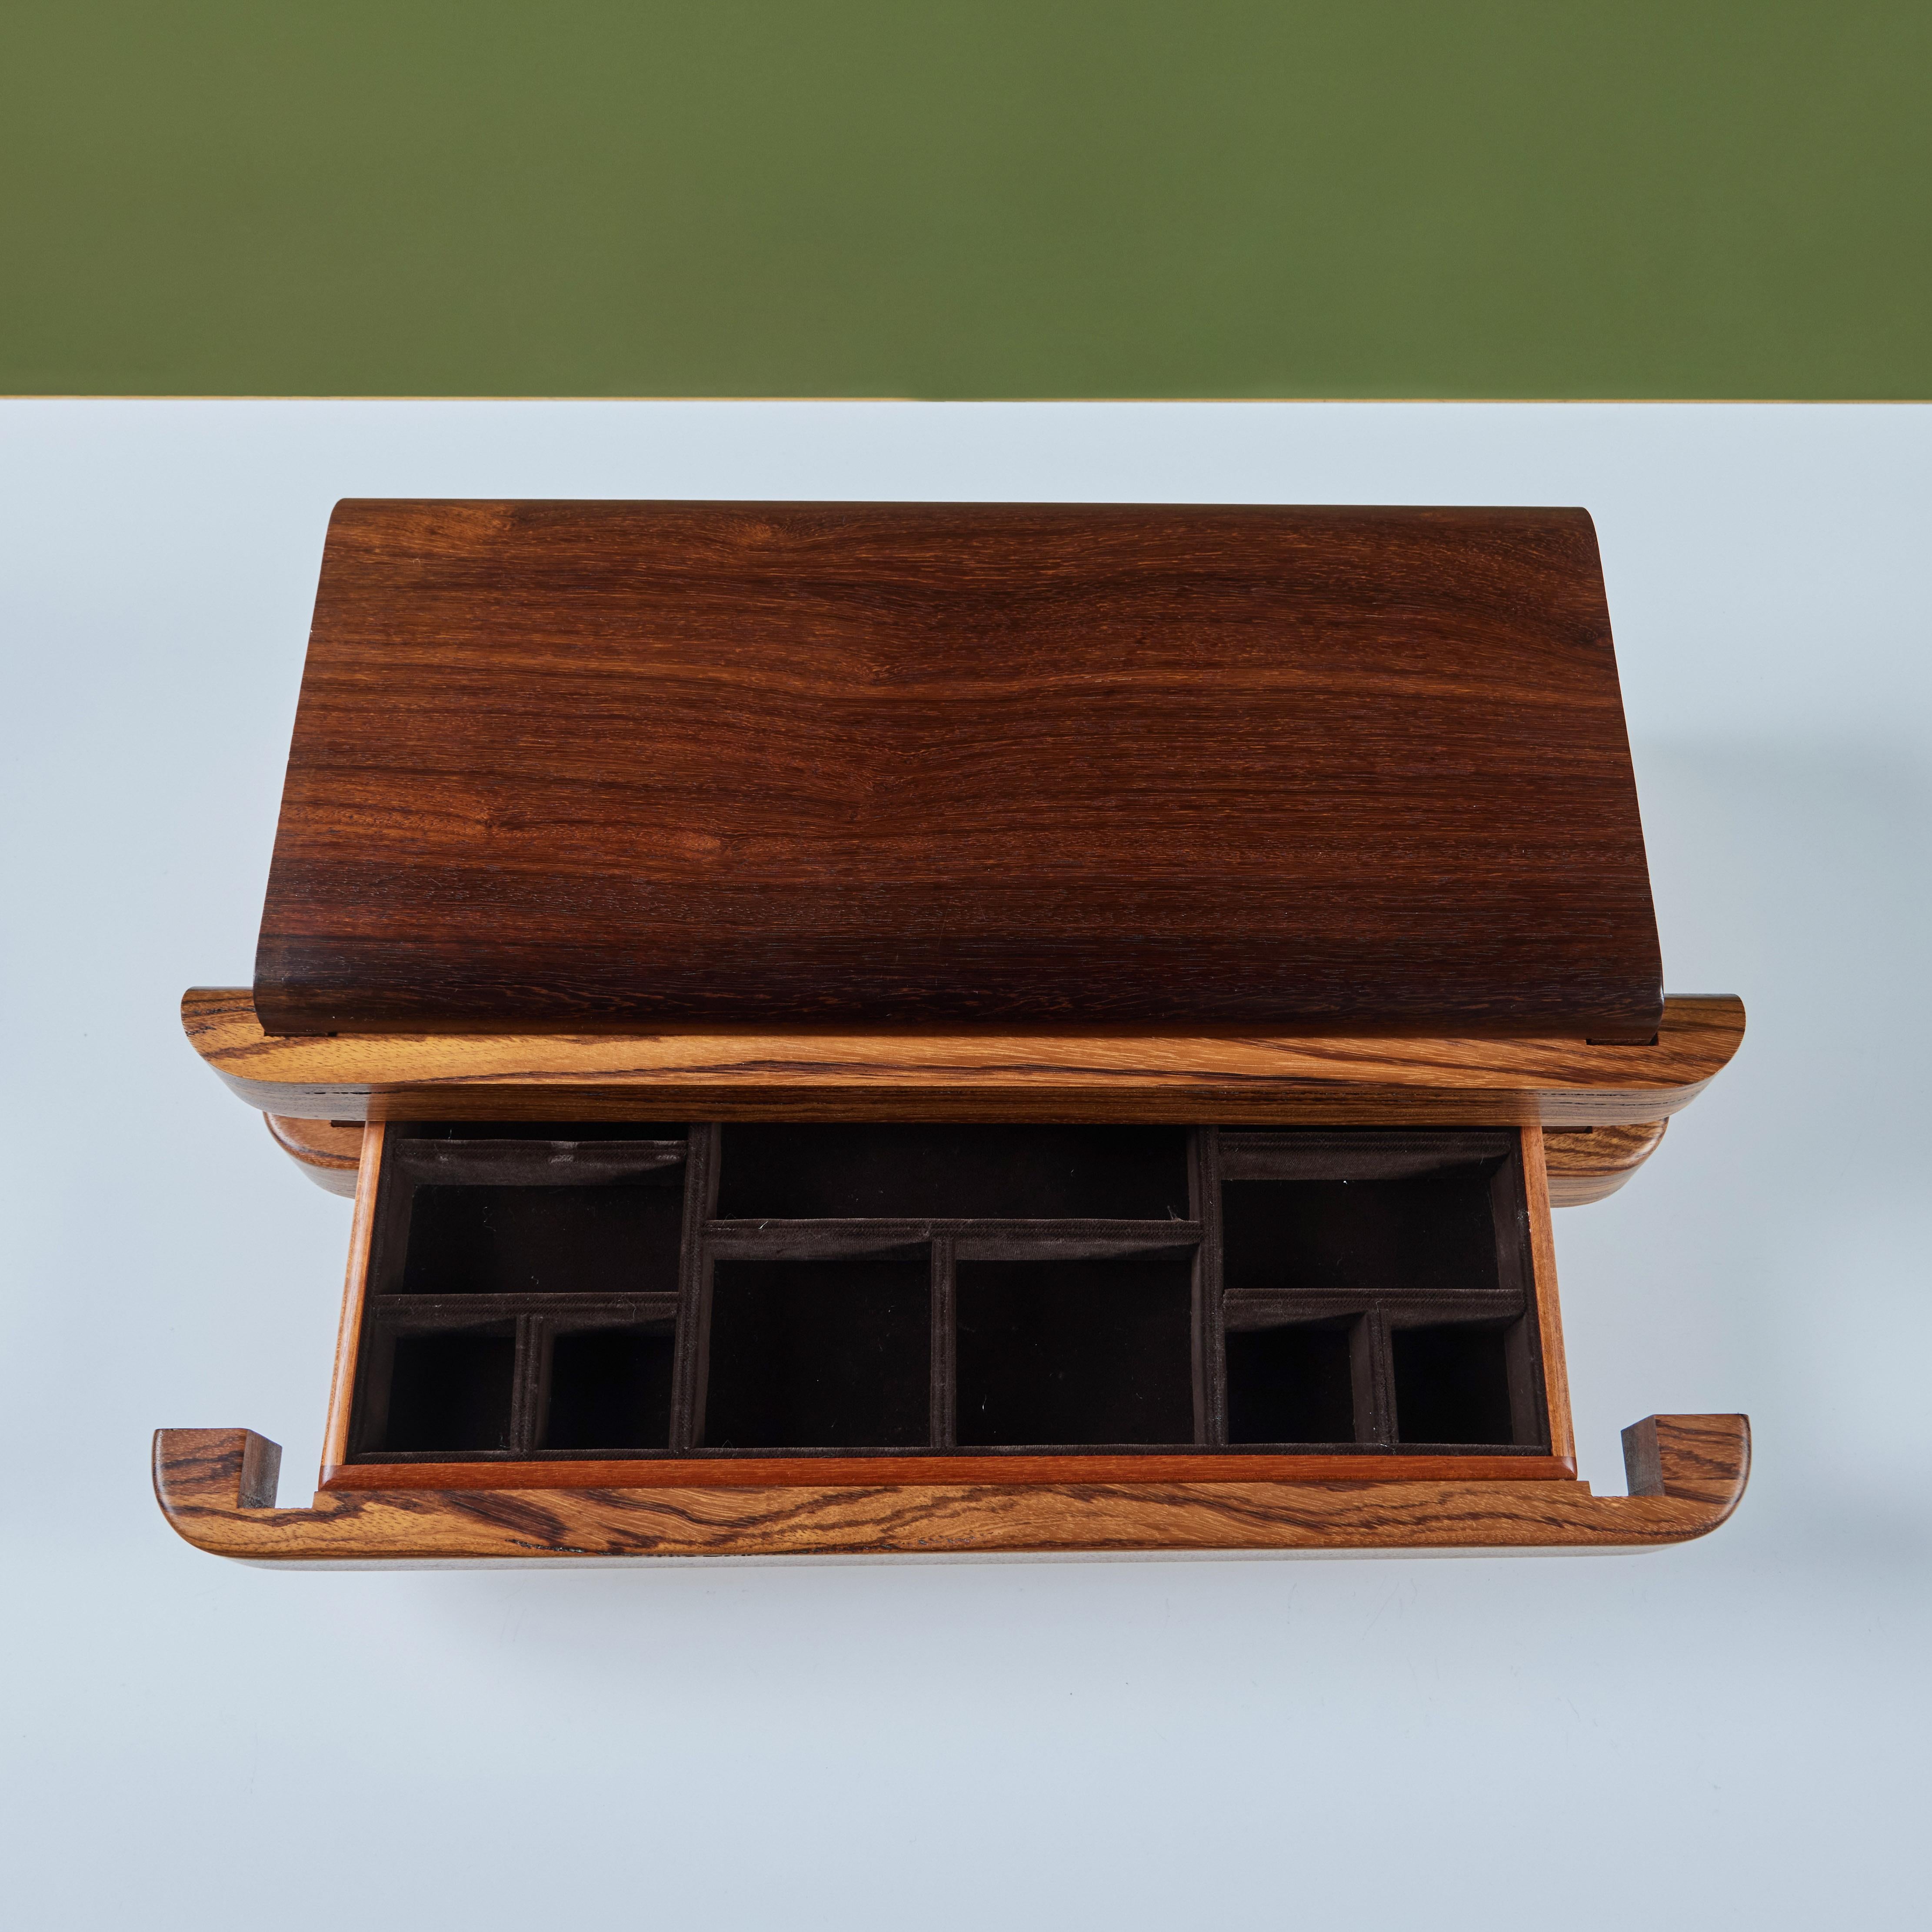 Three Drawer Rosewood and Walnut Jewelry Box For Sale 6